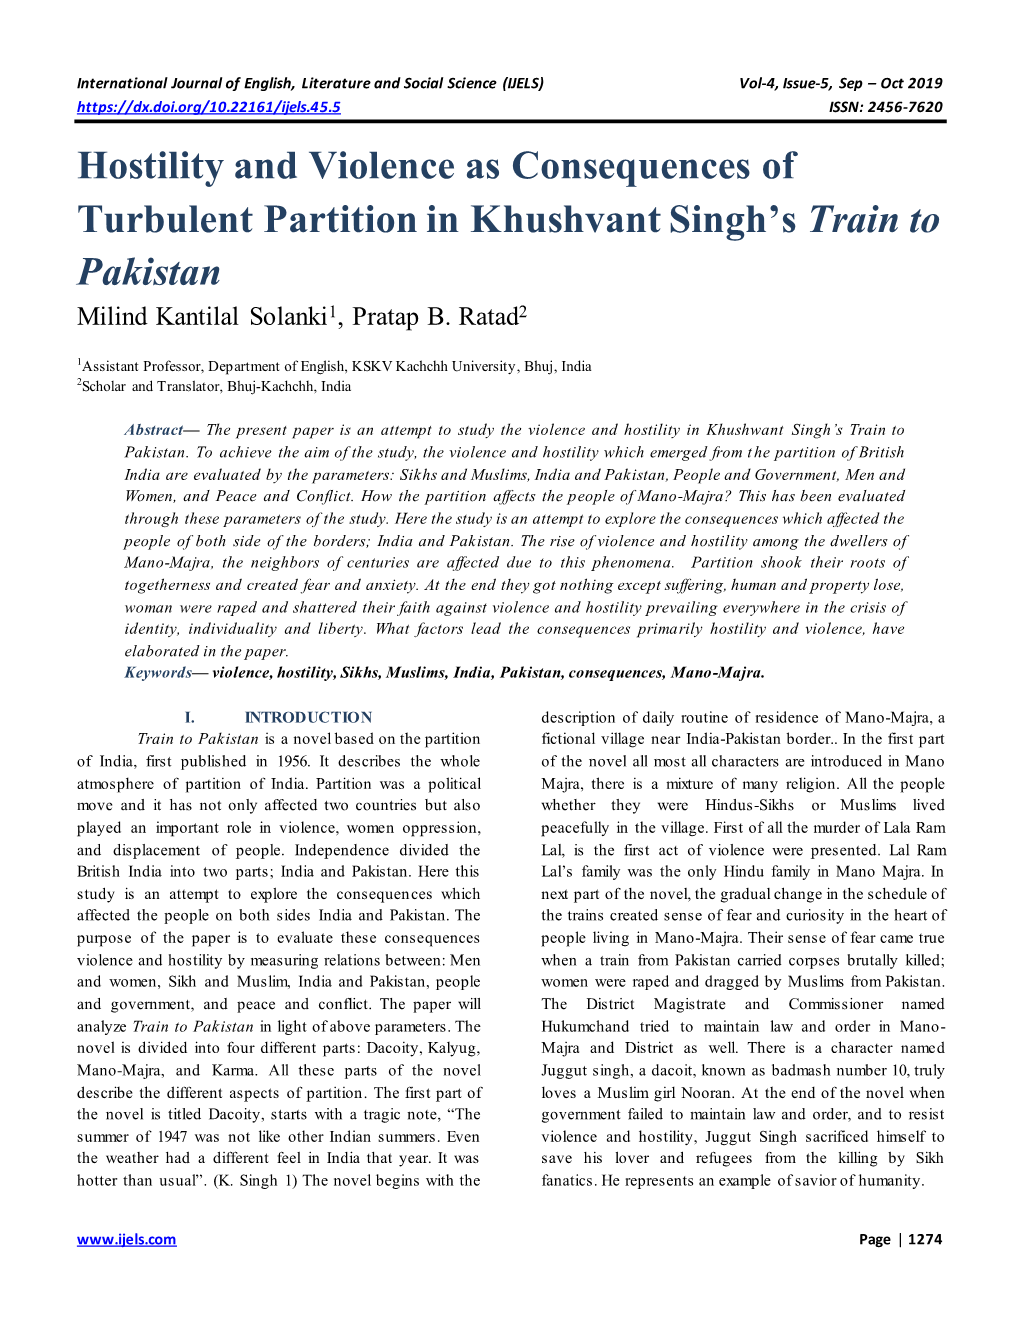 Hostility and Violence As Consequences of Turbulent Partition in Khushvant Singh’S Train to Pakistan Milind Kantilal Solanki1, Pratap B